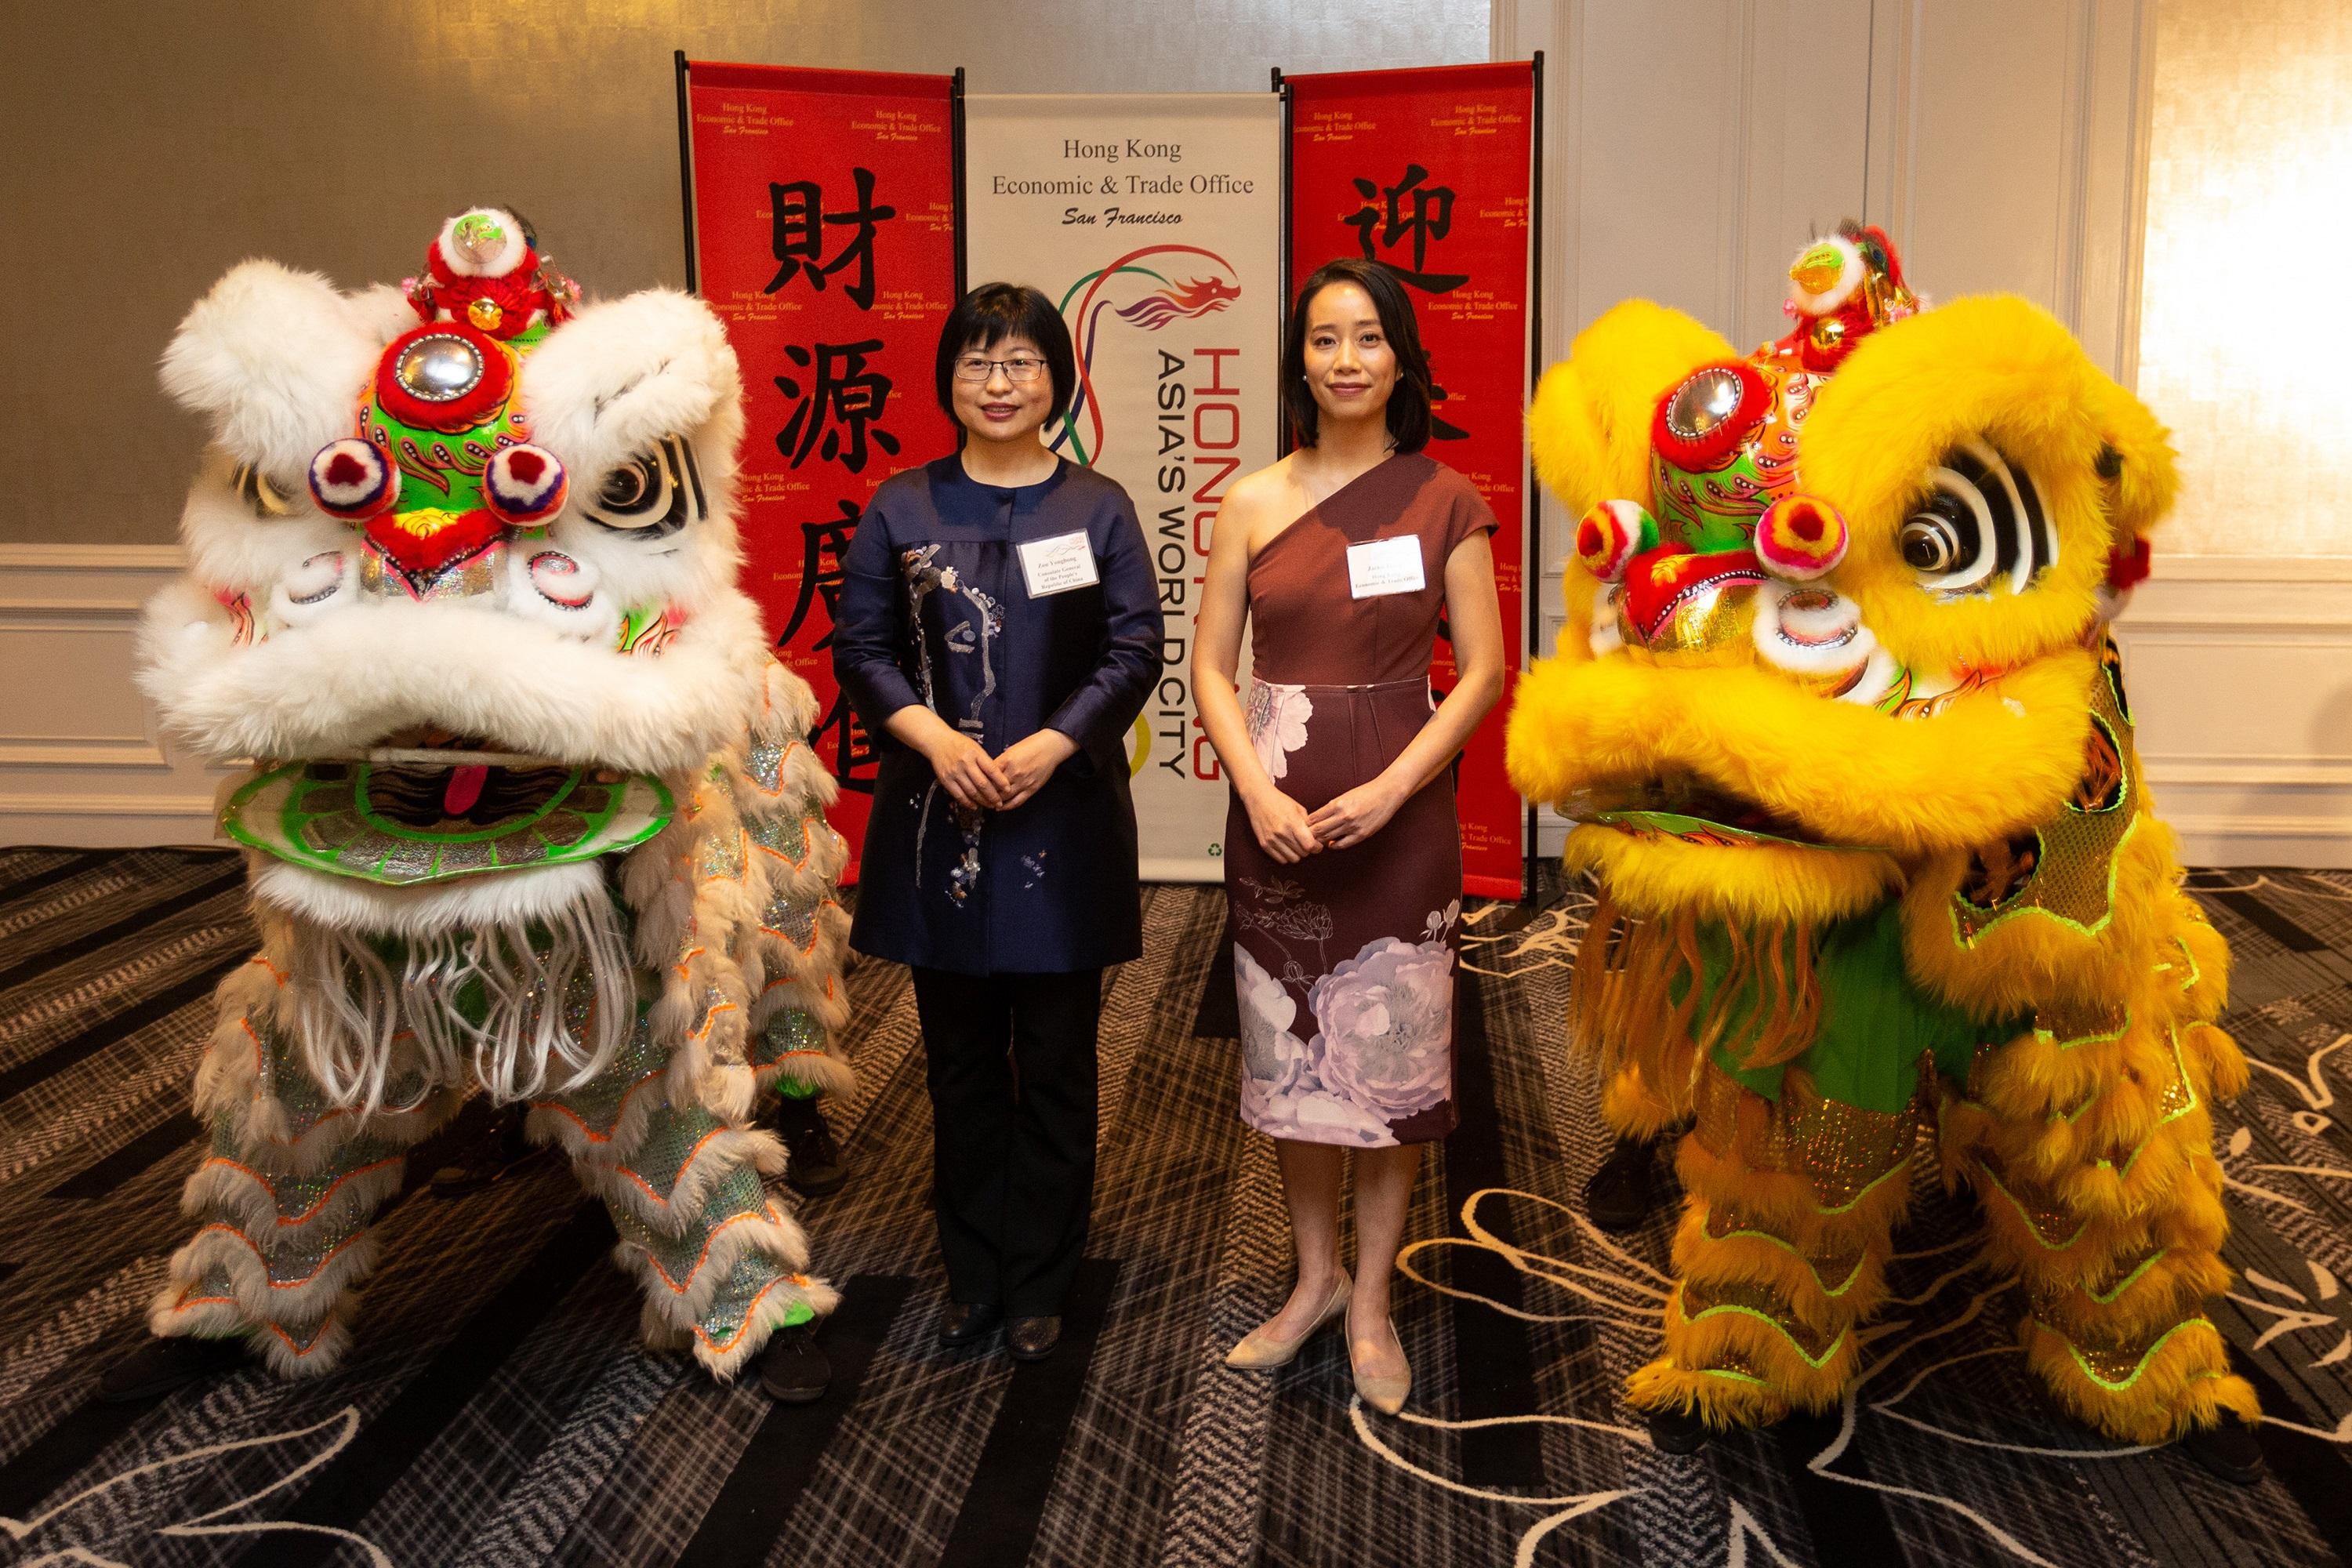 The Director of the Hong Kong Economic and Trade Office in San Francisco, Ms Jacko Tsang (right), and the Deputy Consul General of the People's Republic of China in San Francisco, Ms Zou Yonghong (left), conduct the eye-dotting ceremony at the spring reception in San Francisco on January 26 (San Francisco time).